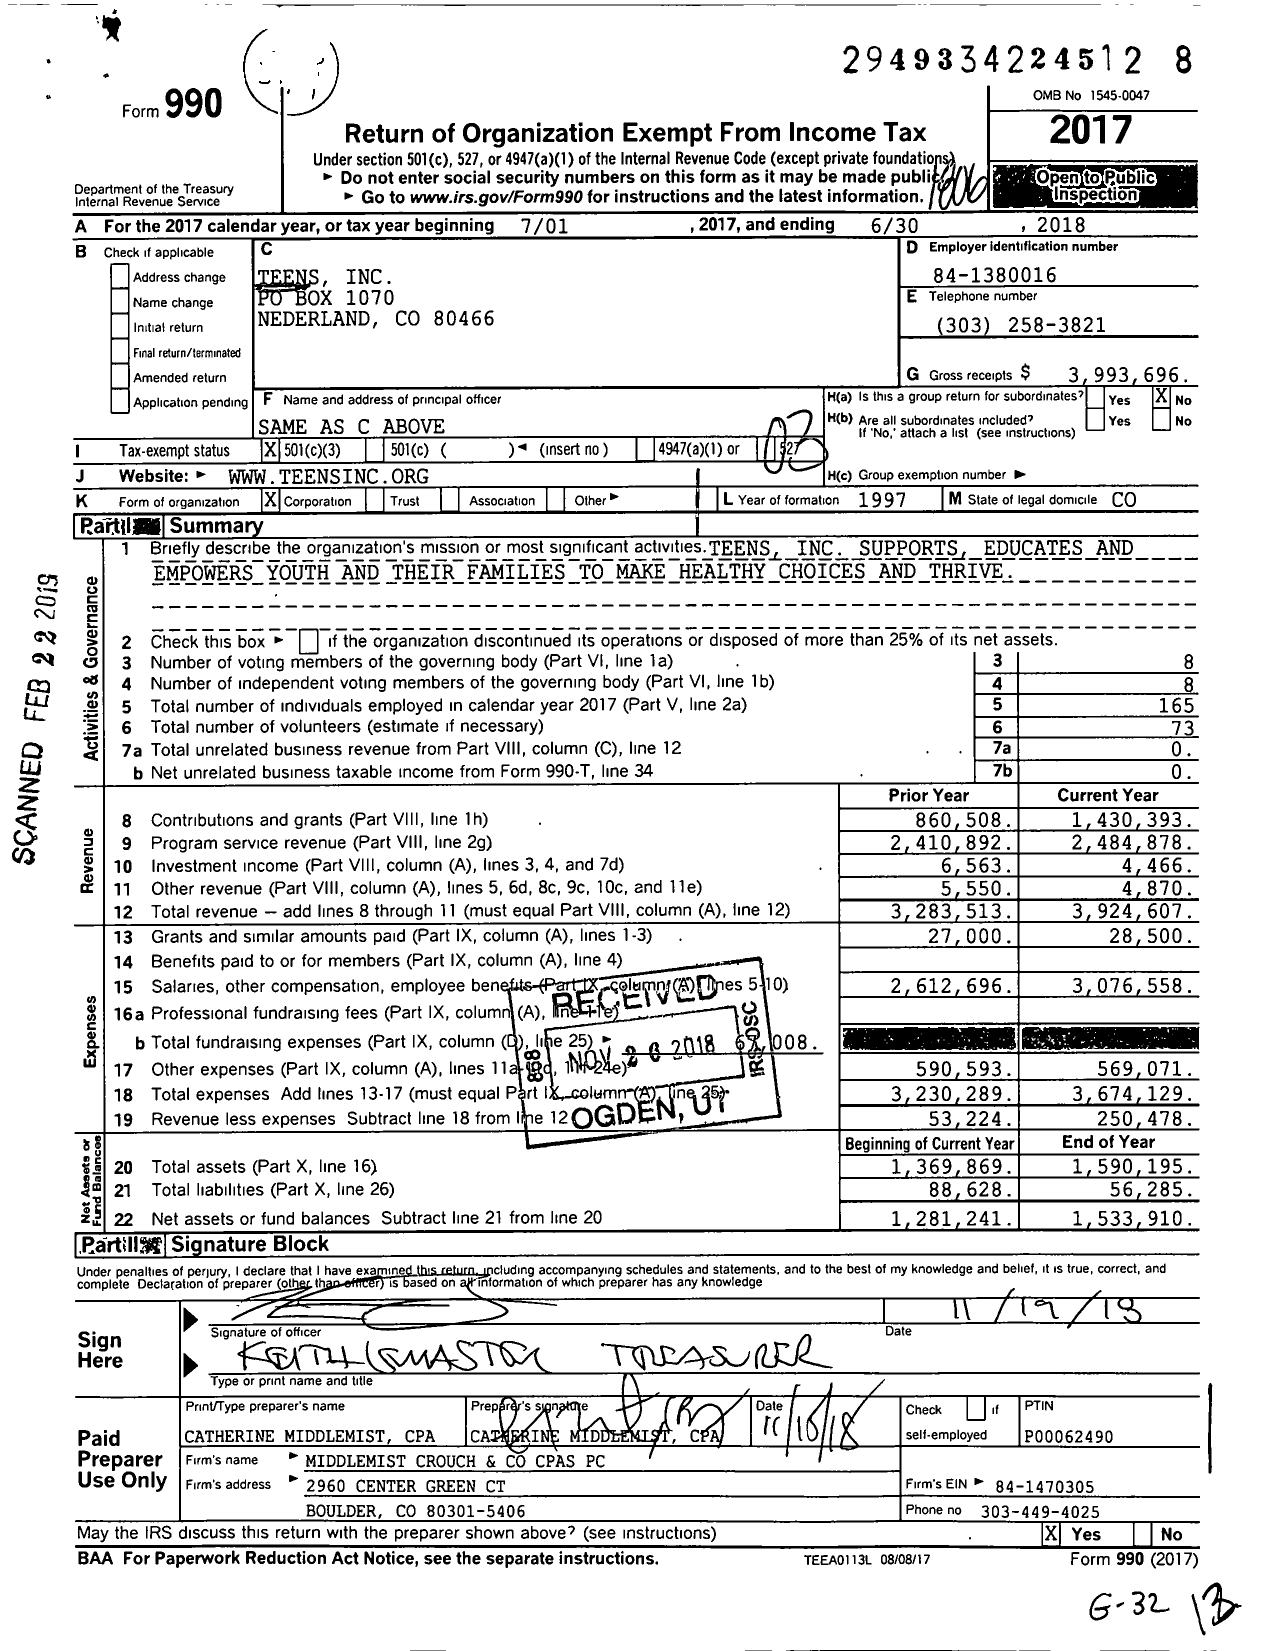 Image of first page of 2017 Form 990 for Teens